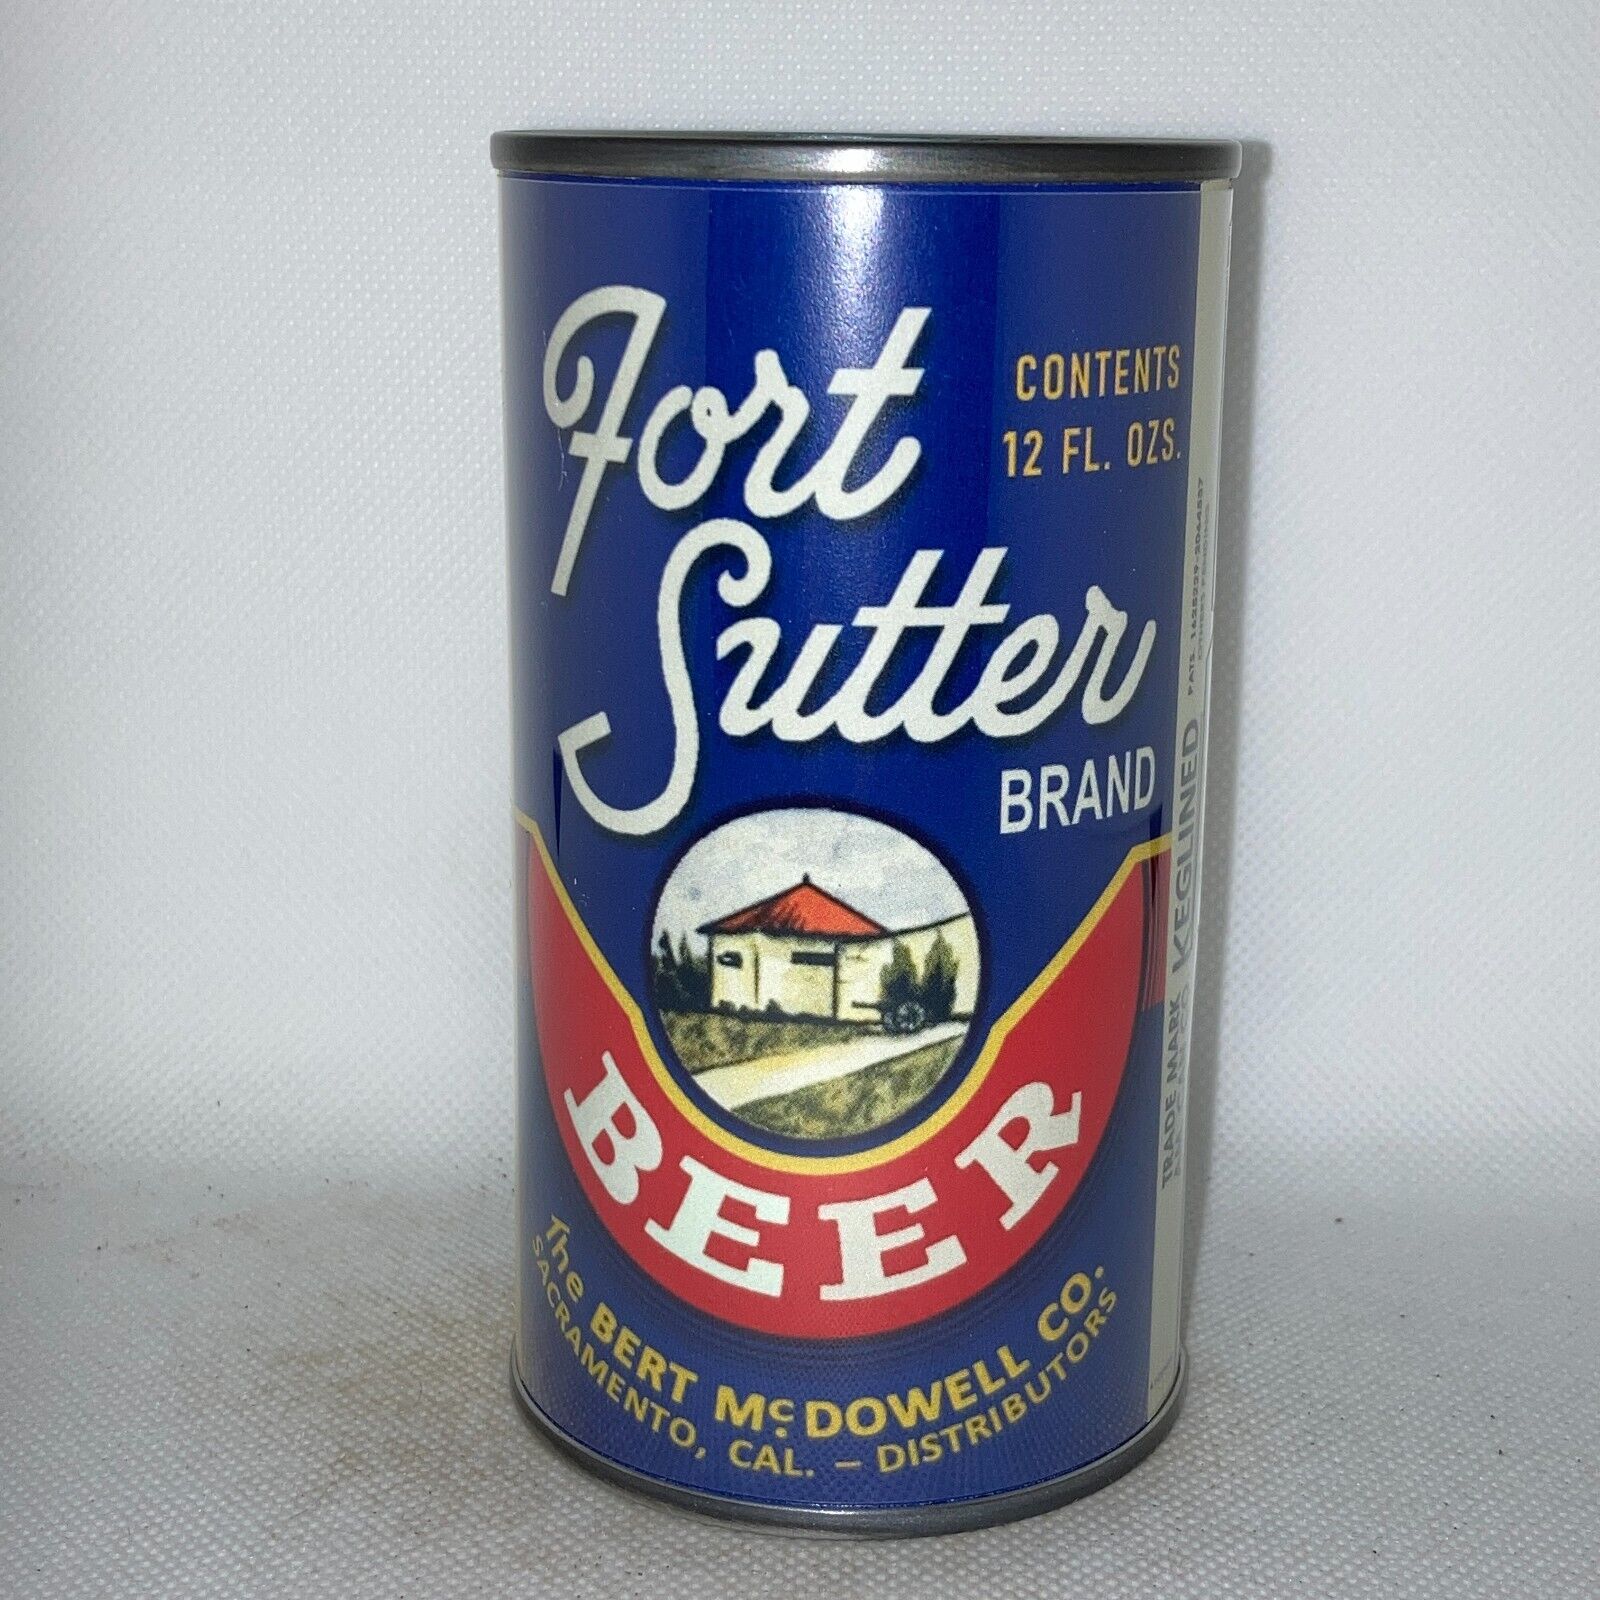 Fort Sutter OI REPLICA / NOVELTY beer can, paper label